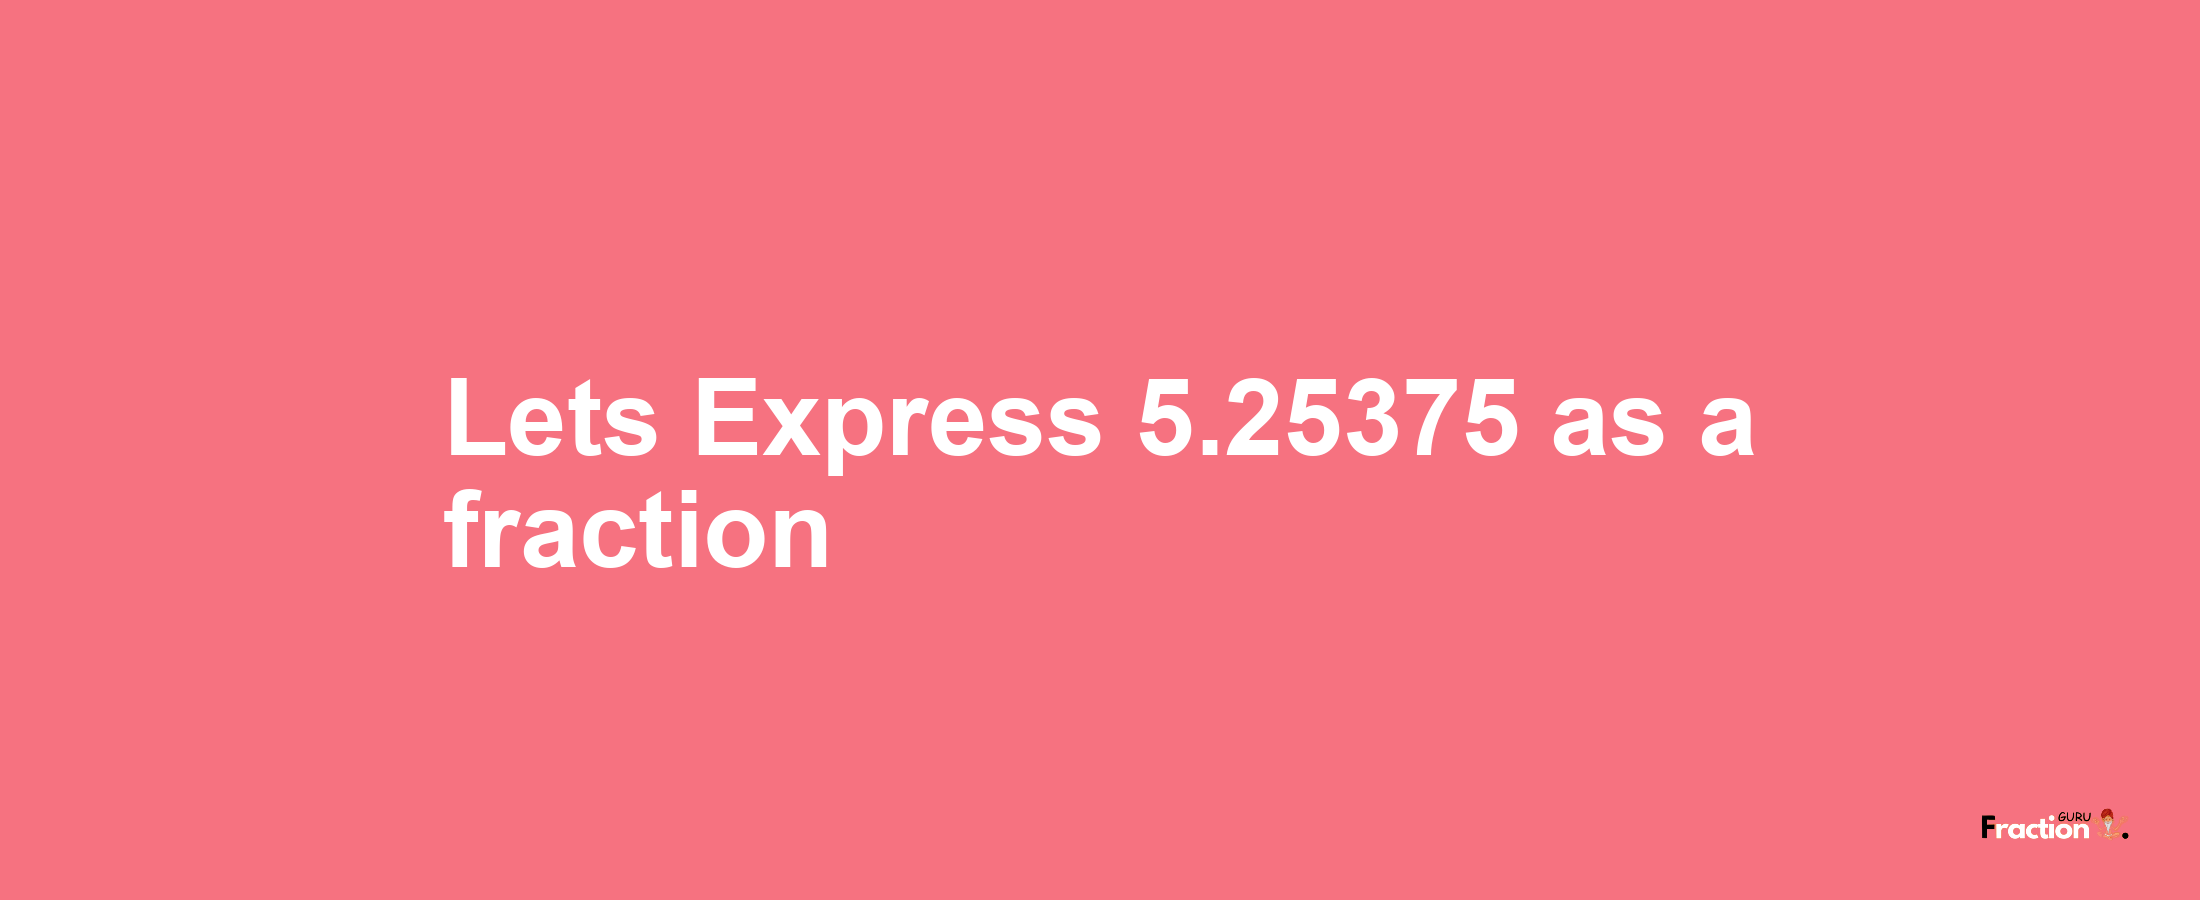 Lets Express 5.25375 as afraction